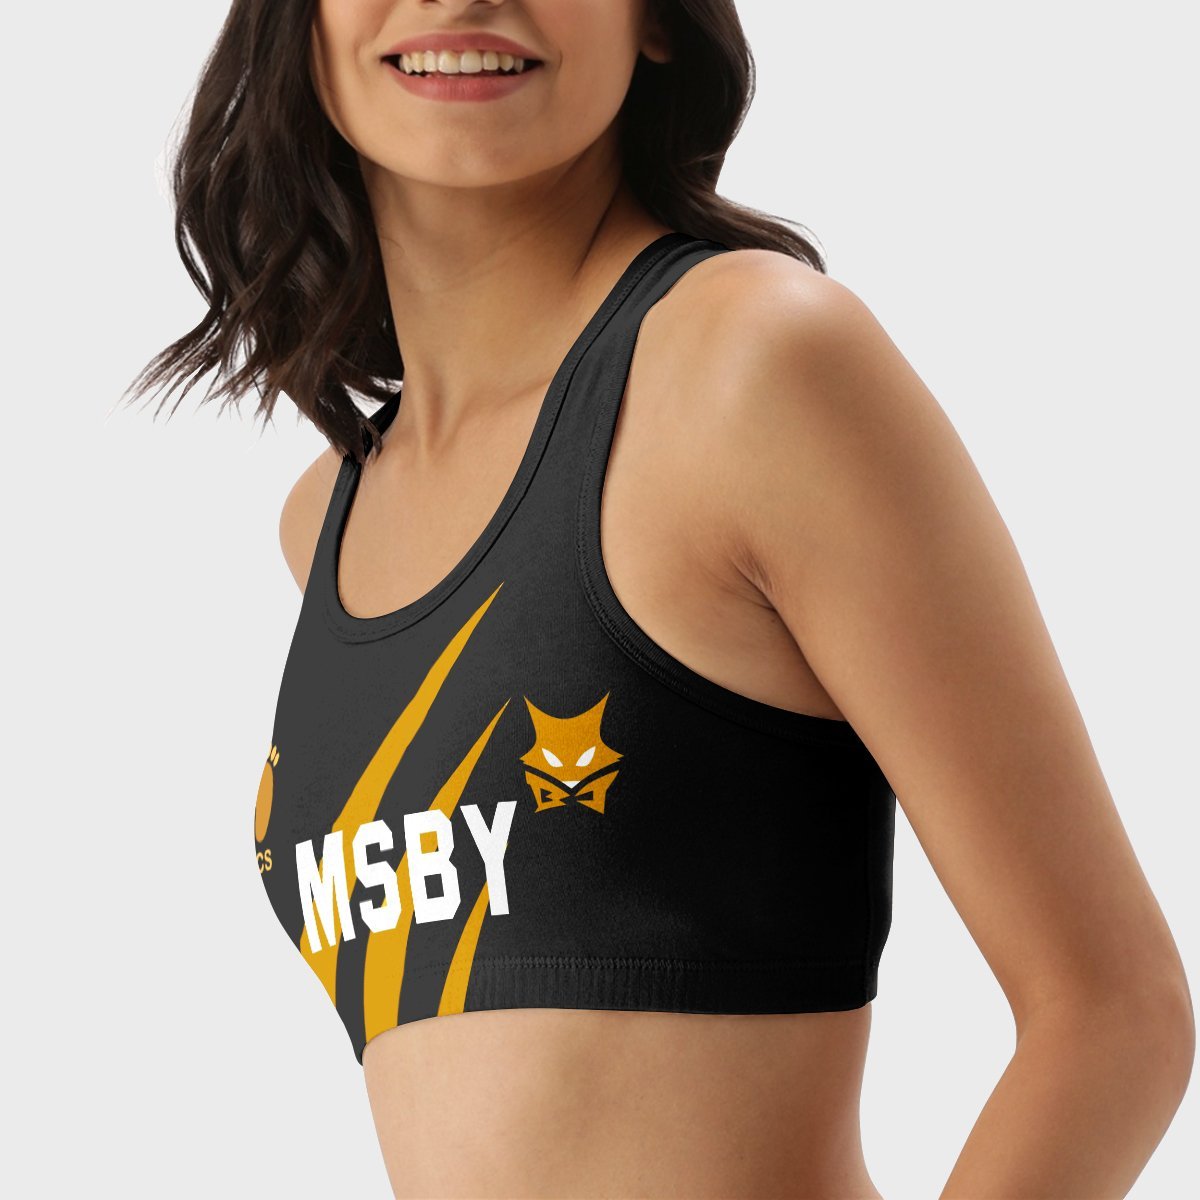 team msby black jackals active wear set 432437 - Anime Swimsuits